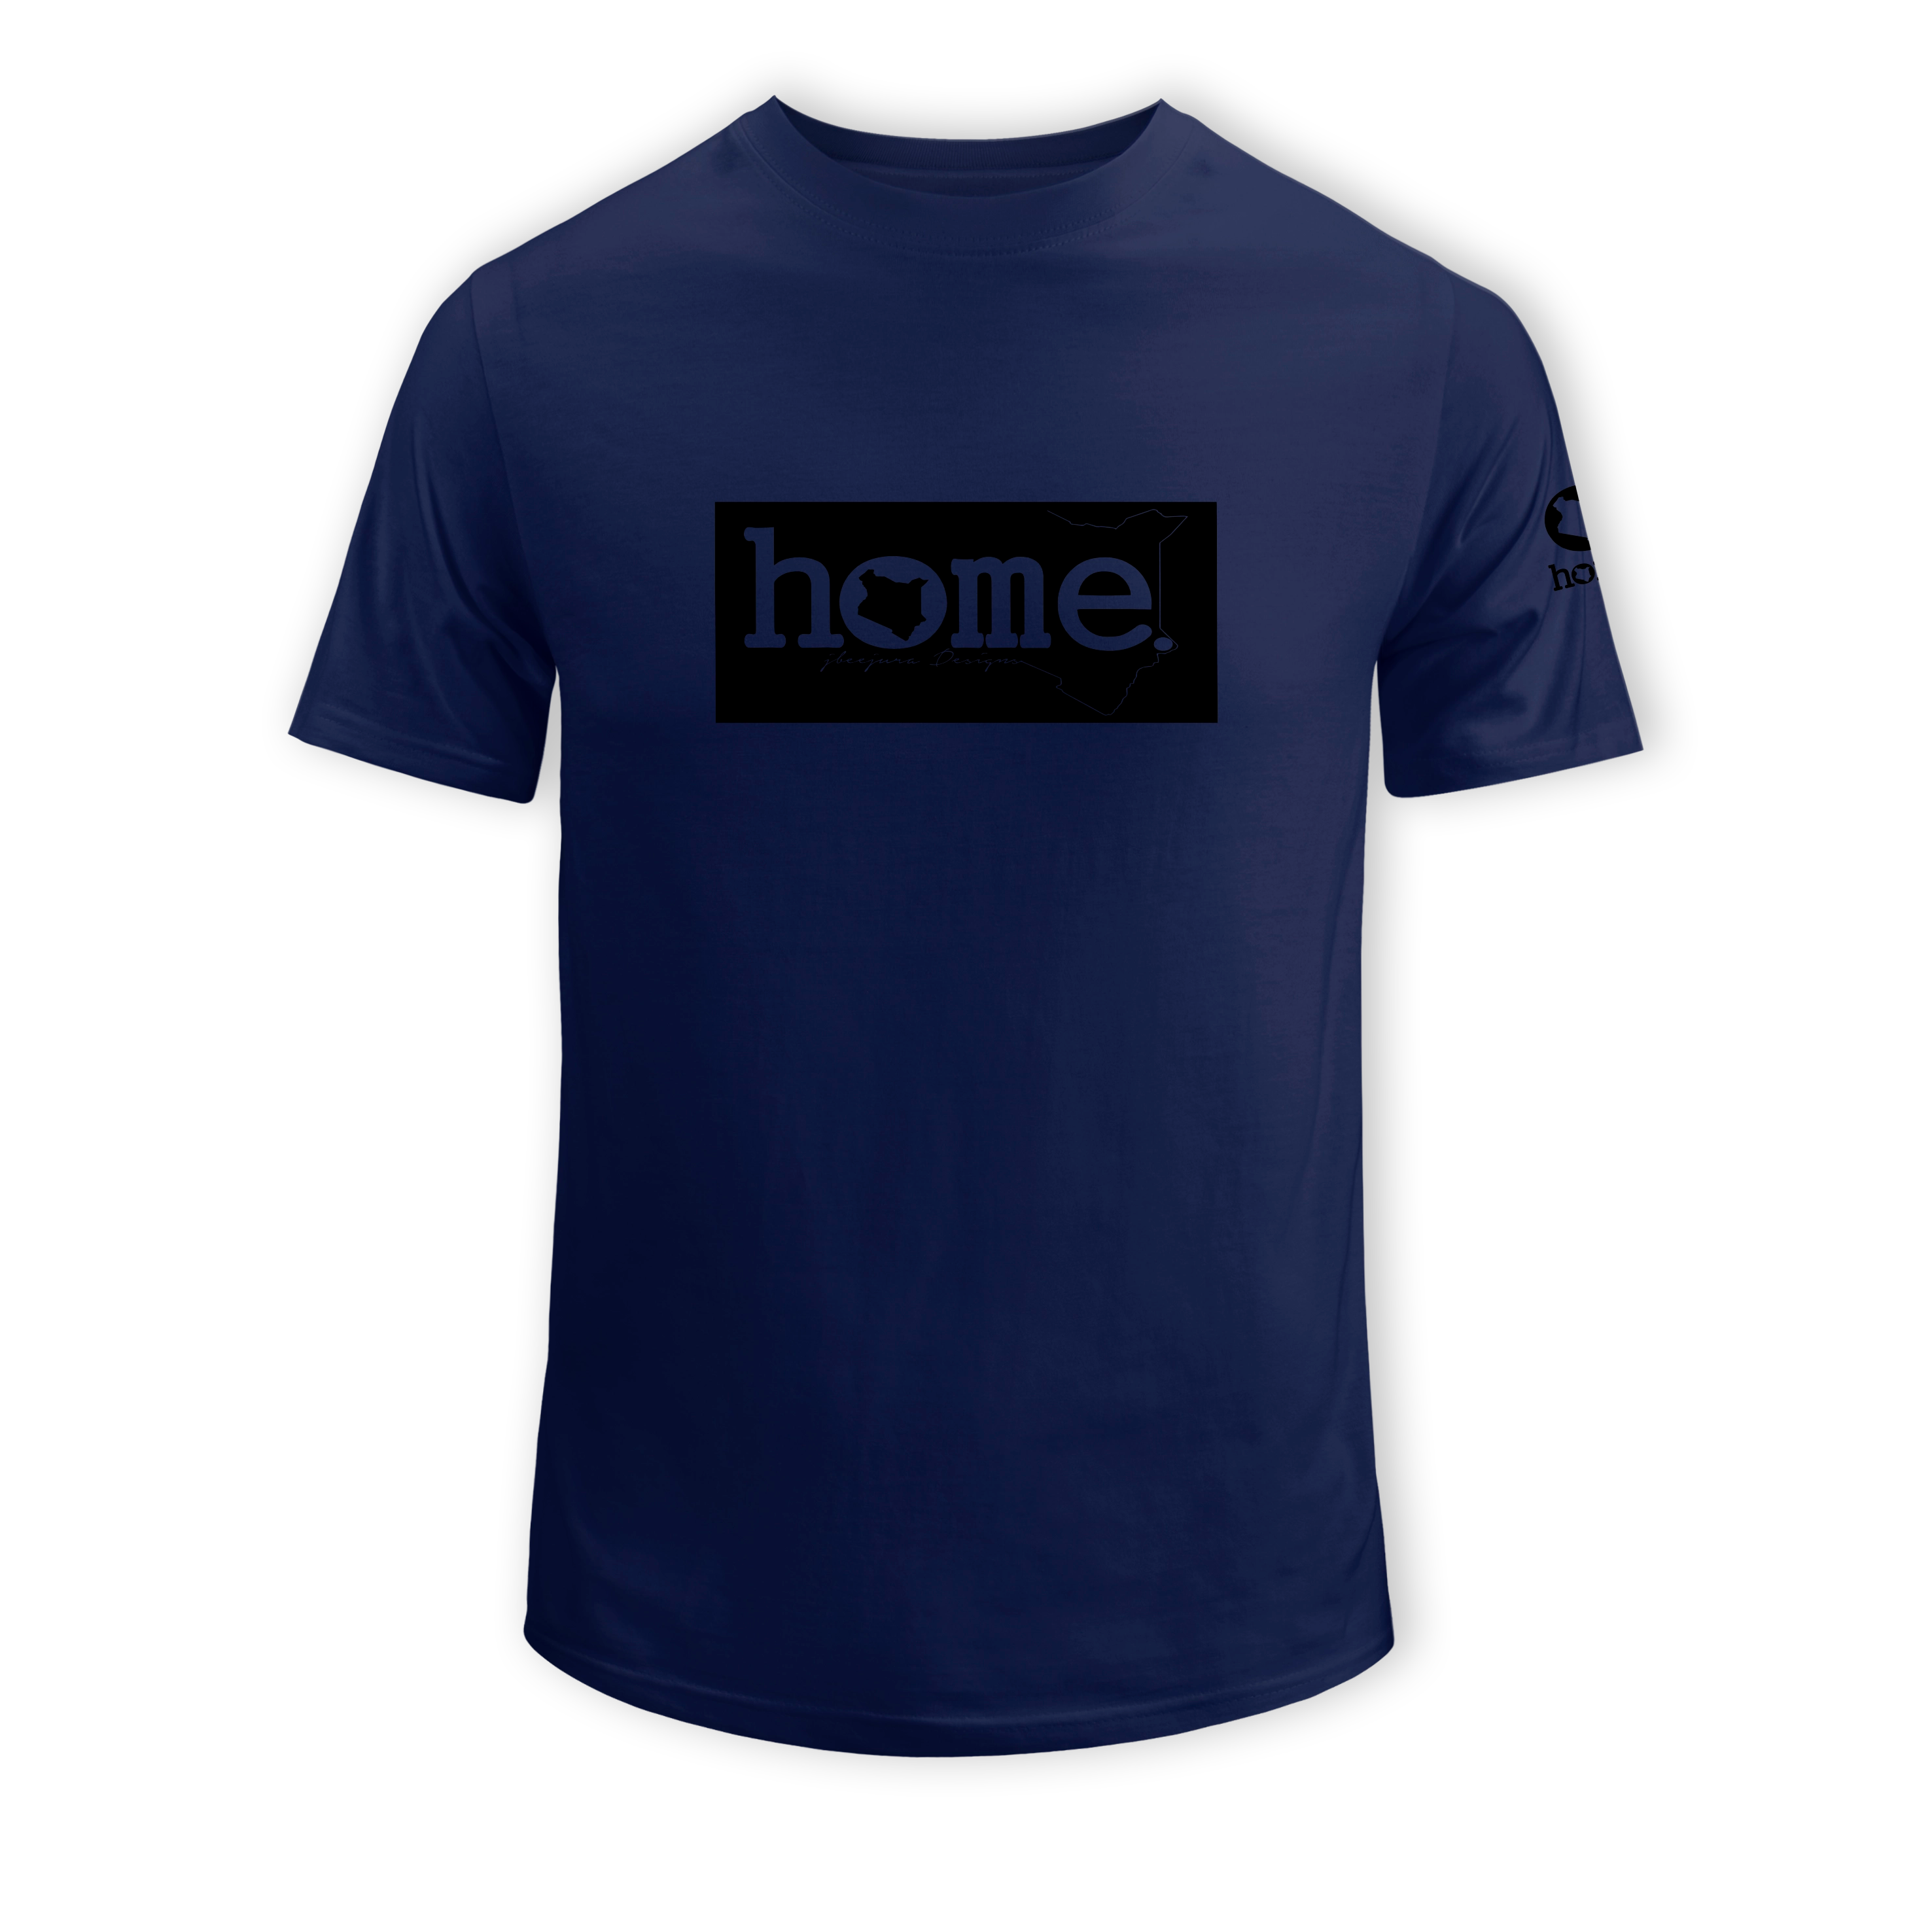 home_254 SHORT-SLEEVED NAVY BLUE T-SHIRT WITH A BLACK CLASSIC PRINT – COTTON PLUS FABRIC